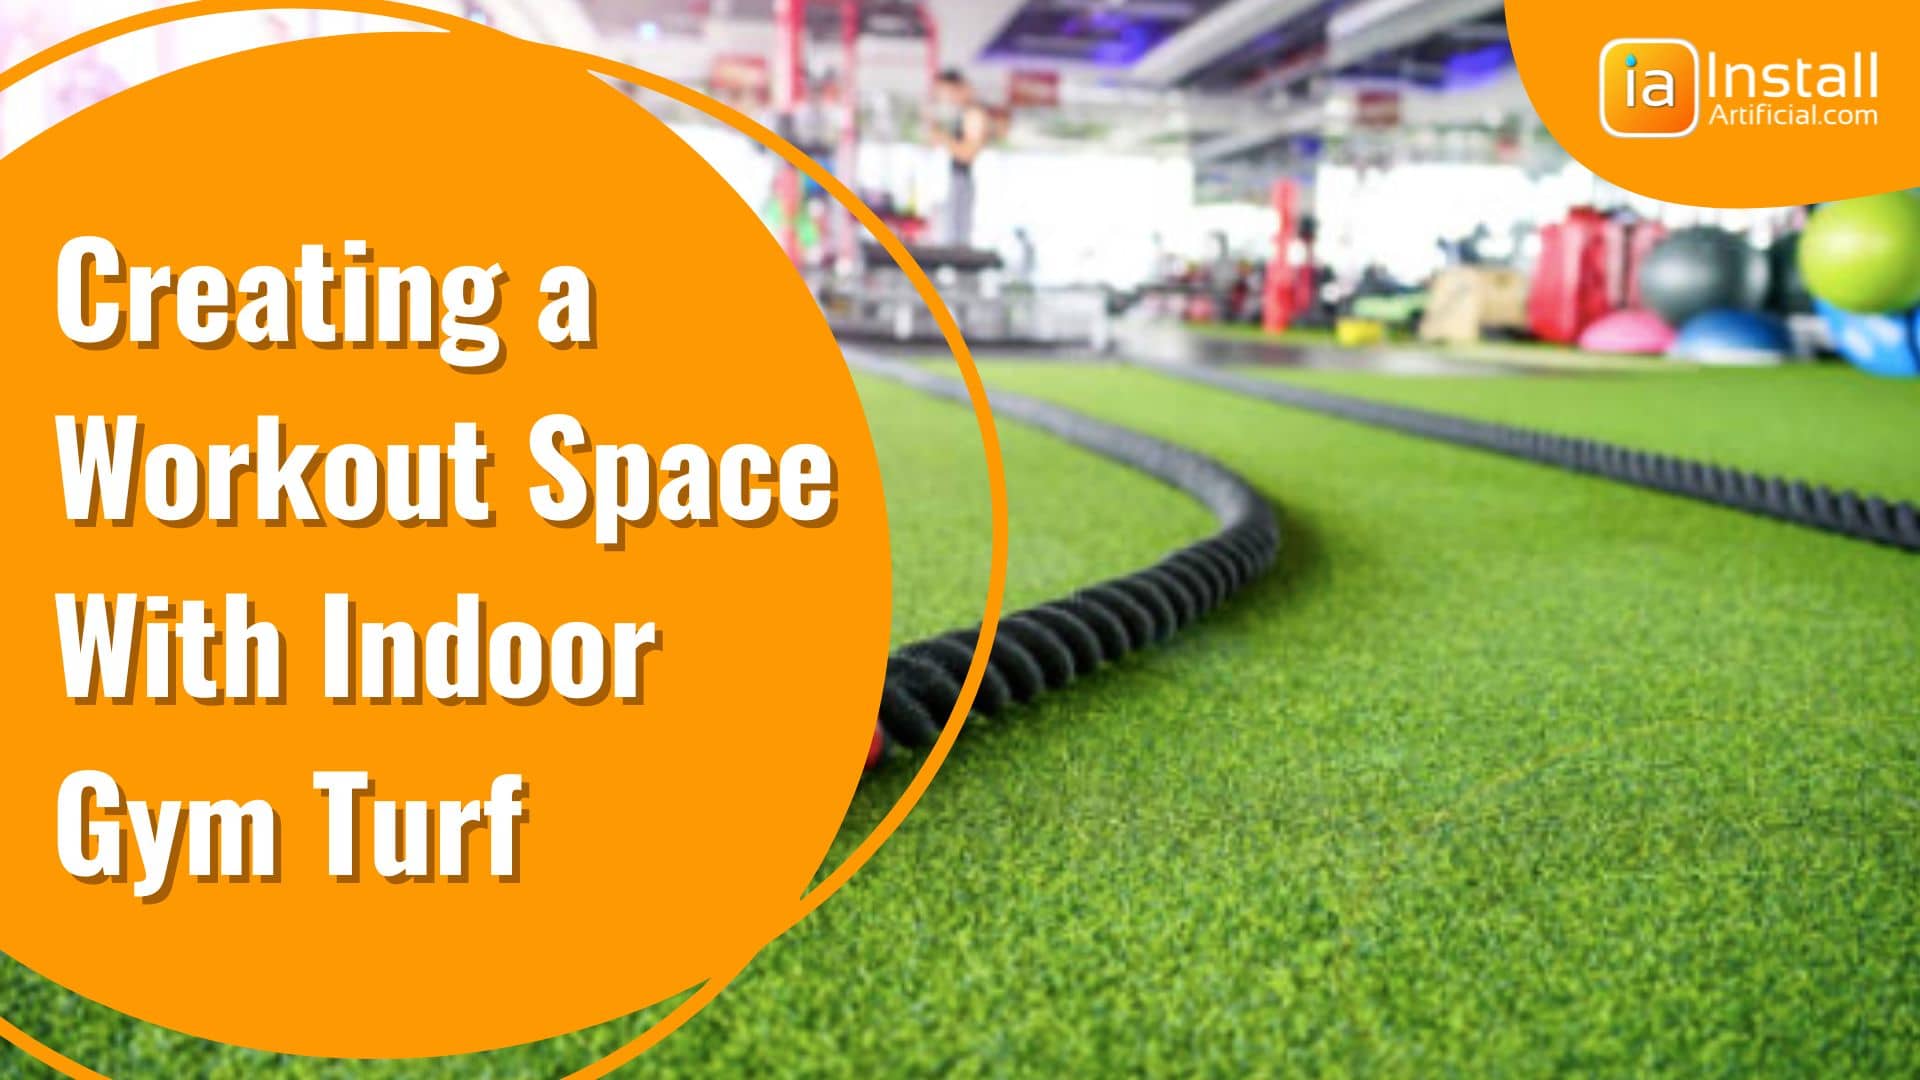 Creating a Workout Space with Indoor Gym Turf